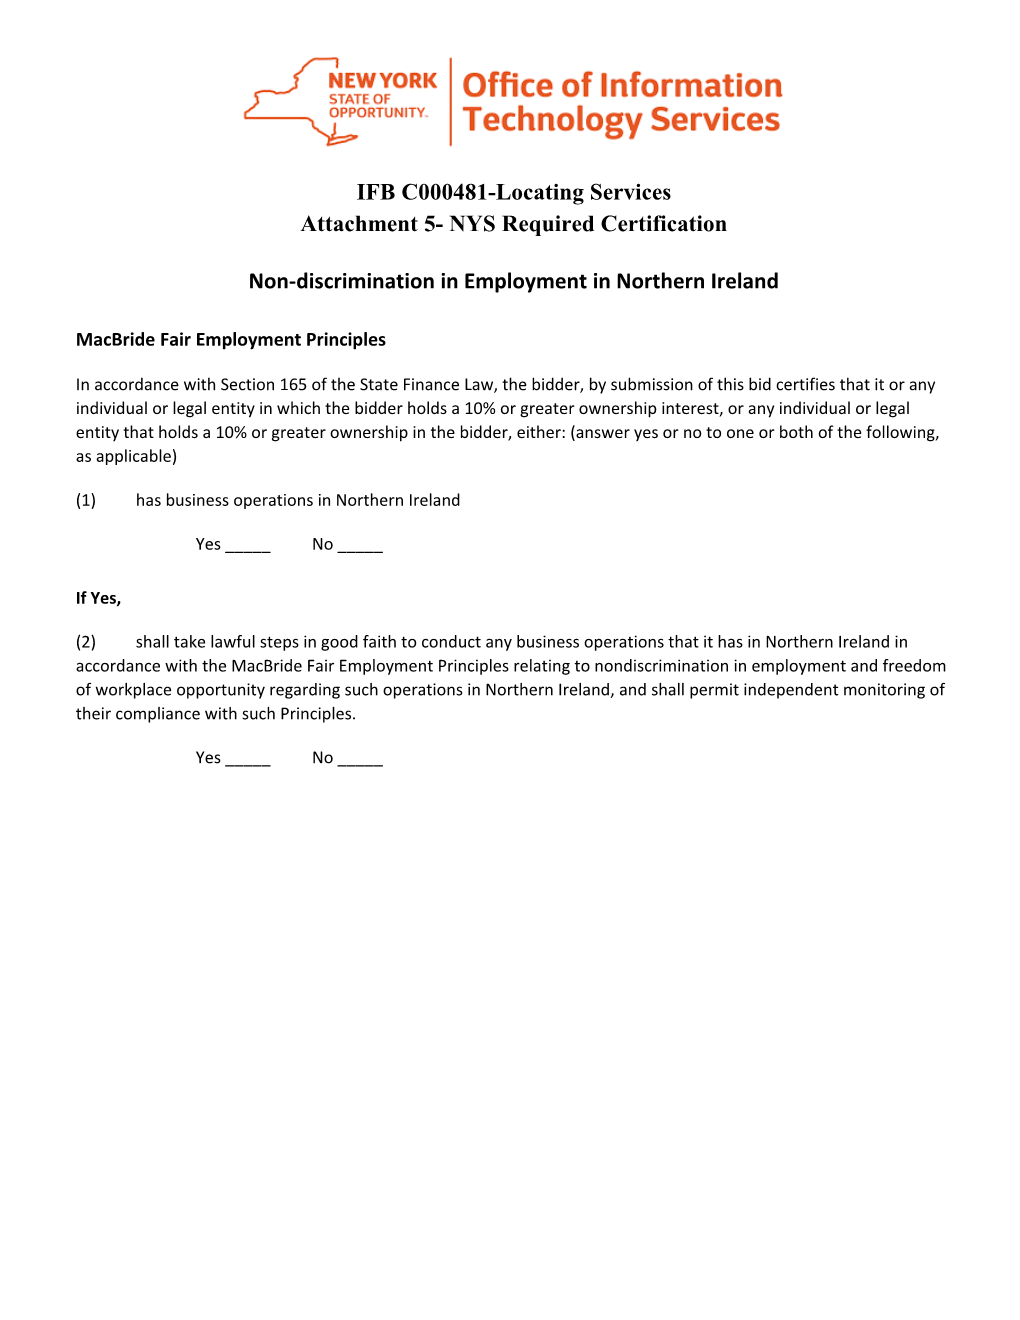 Attachment 5- NYS Required Certification